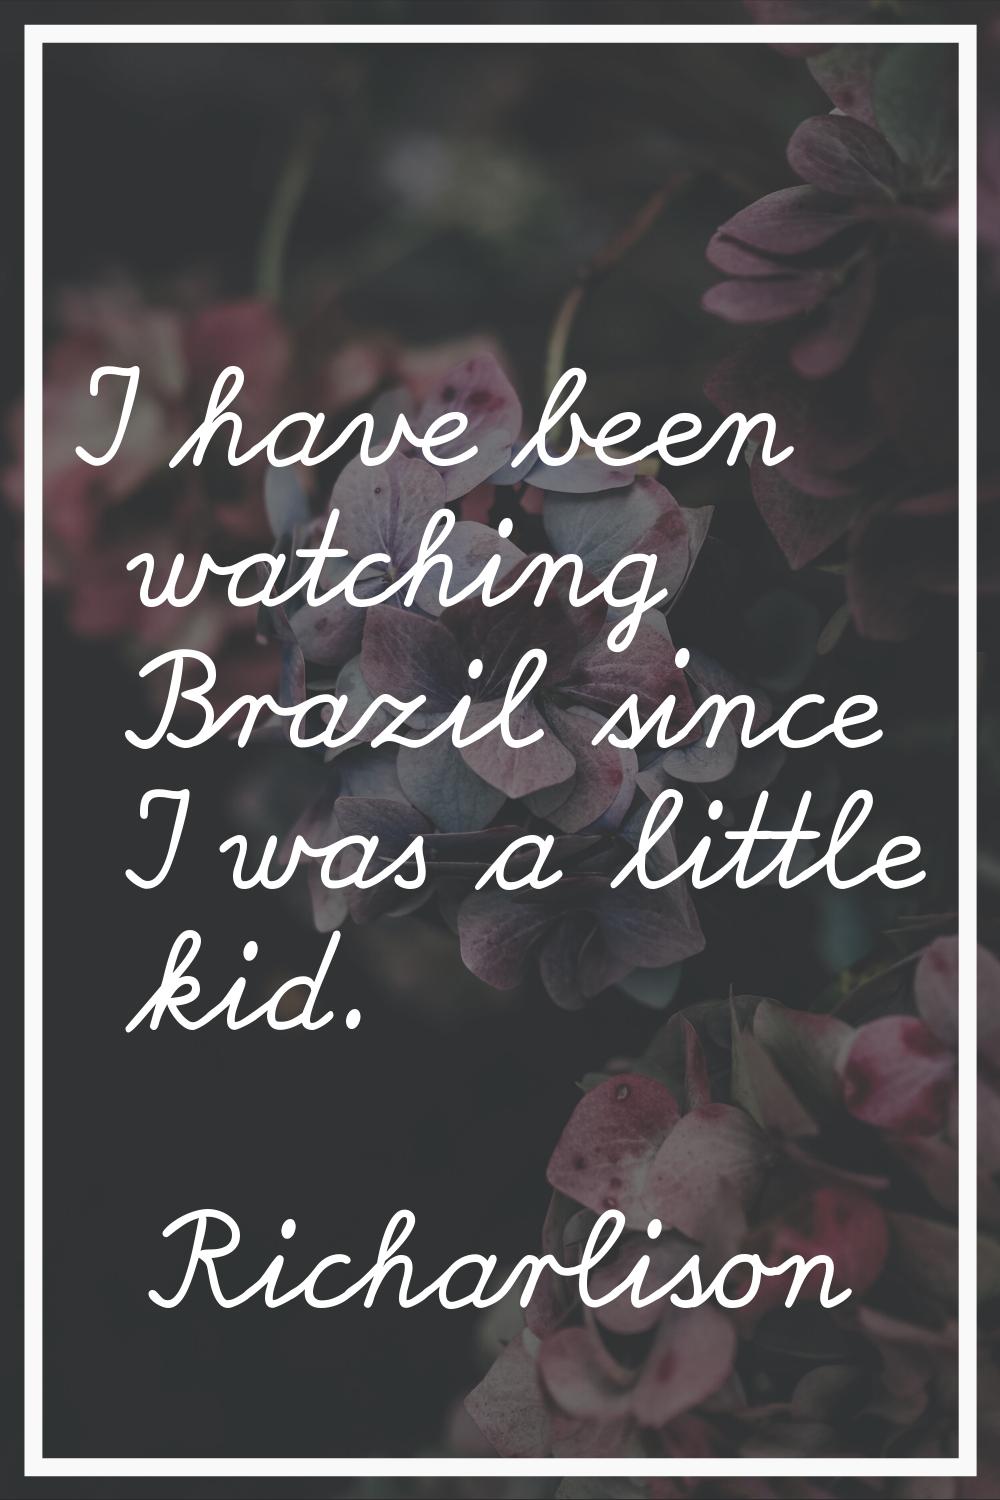 I have been watching Brazil since I was a little kid.